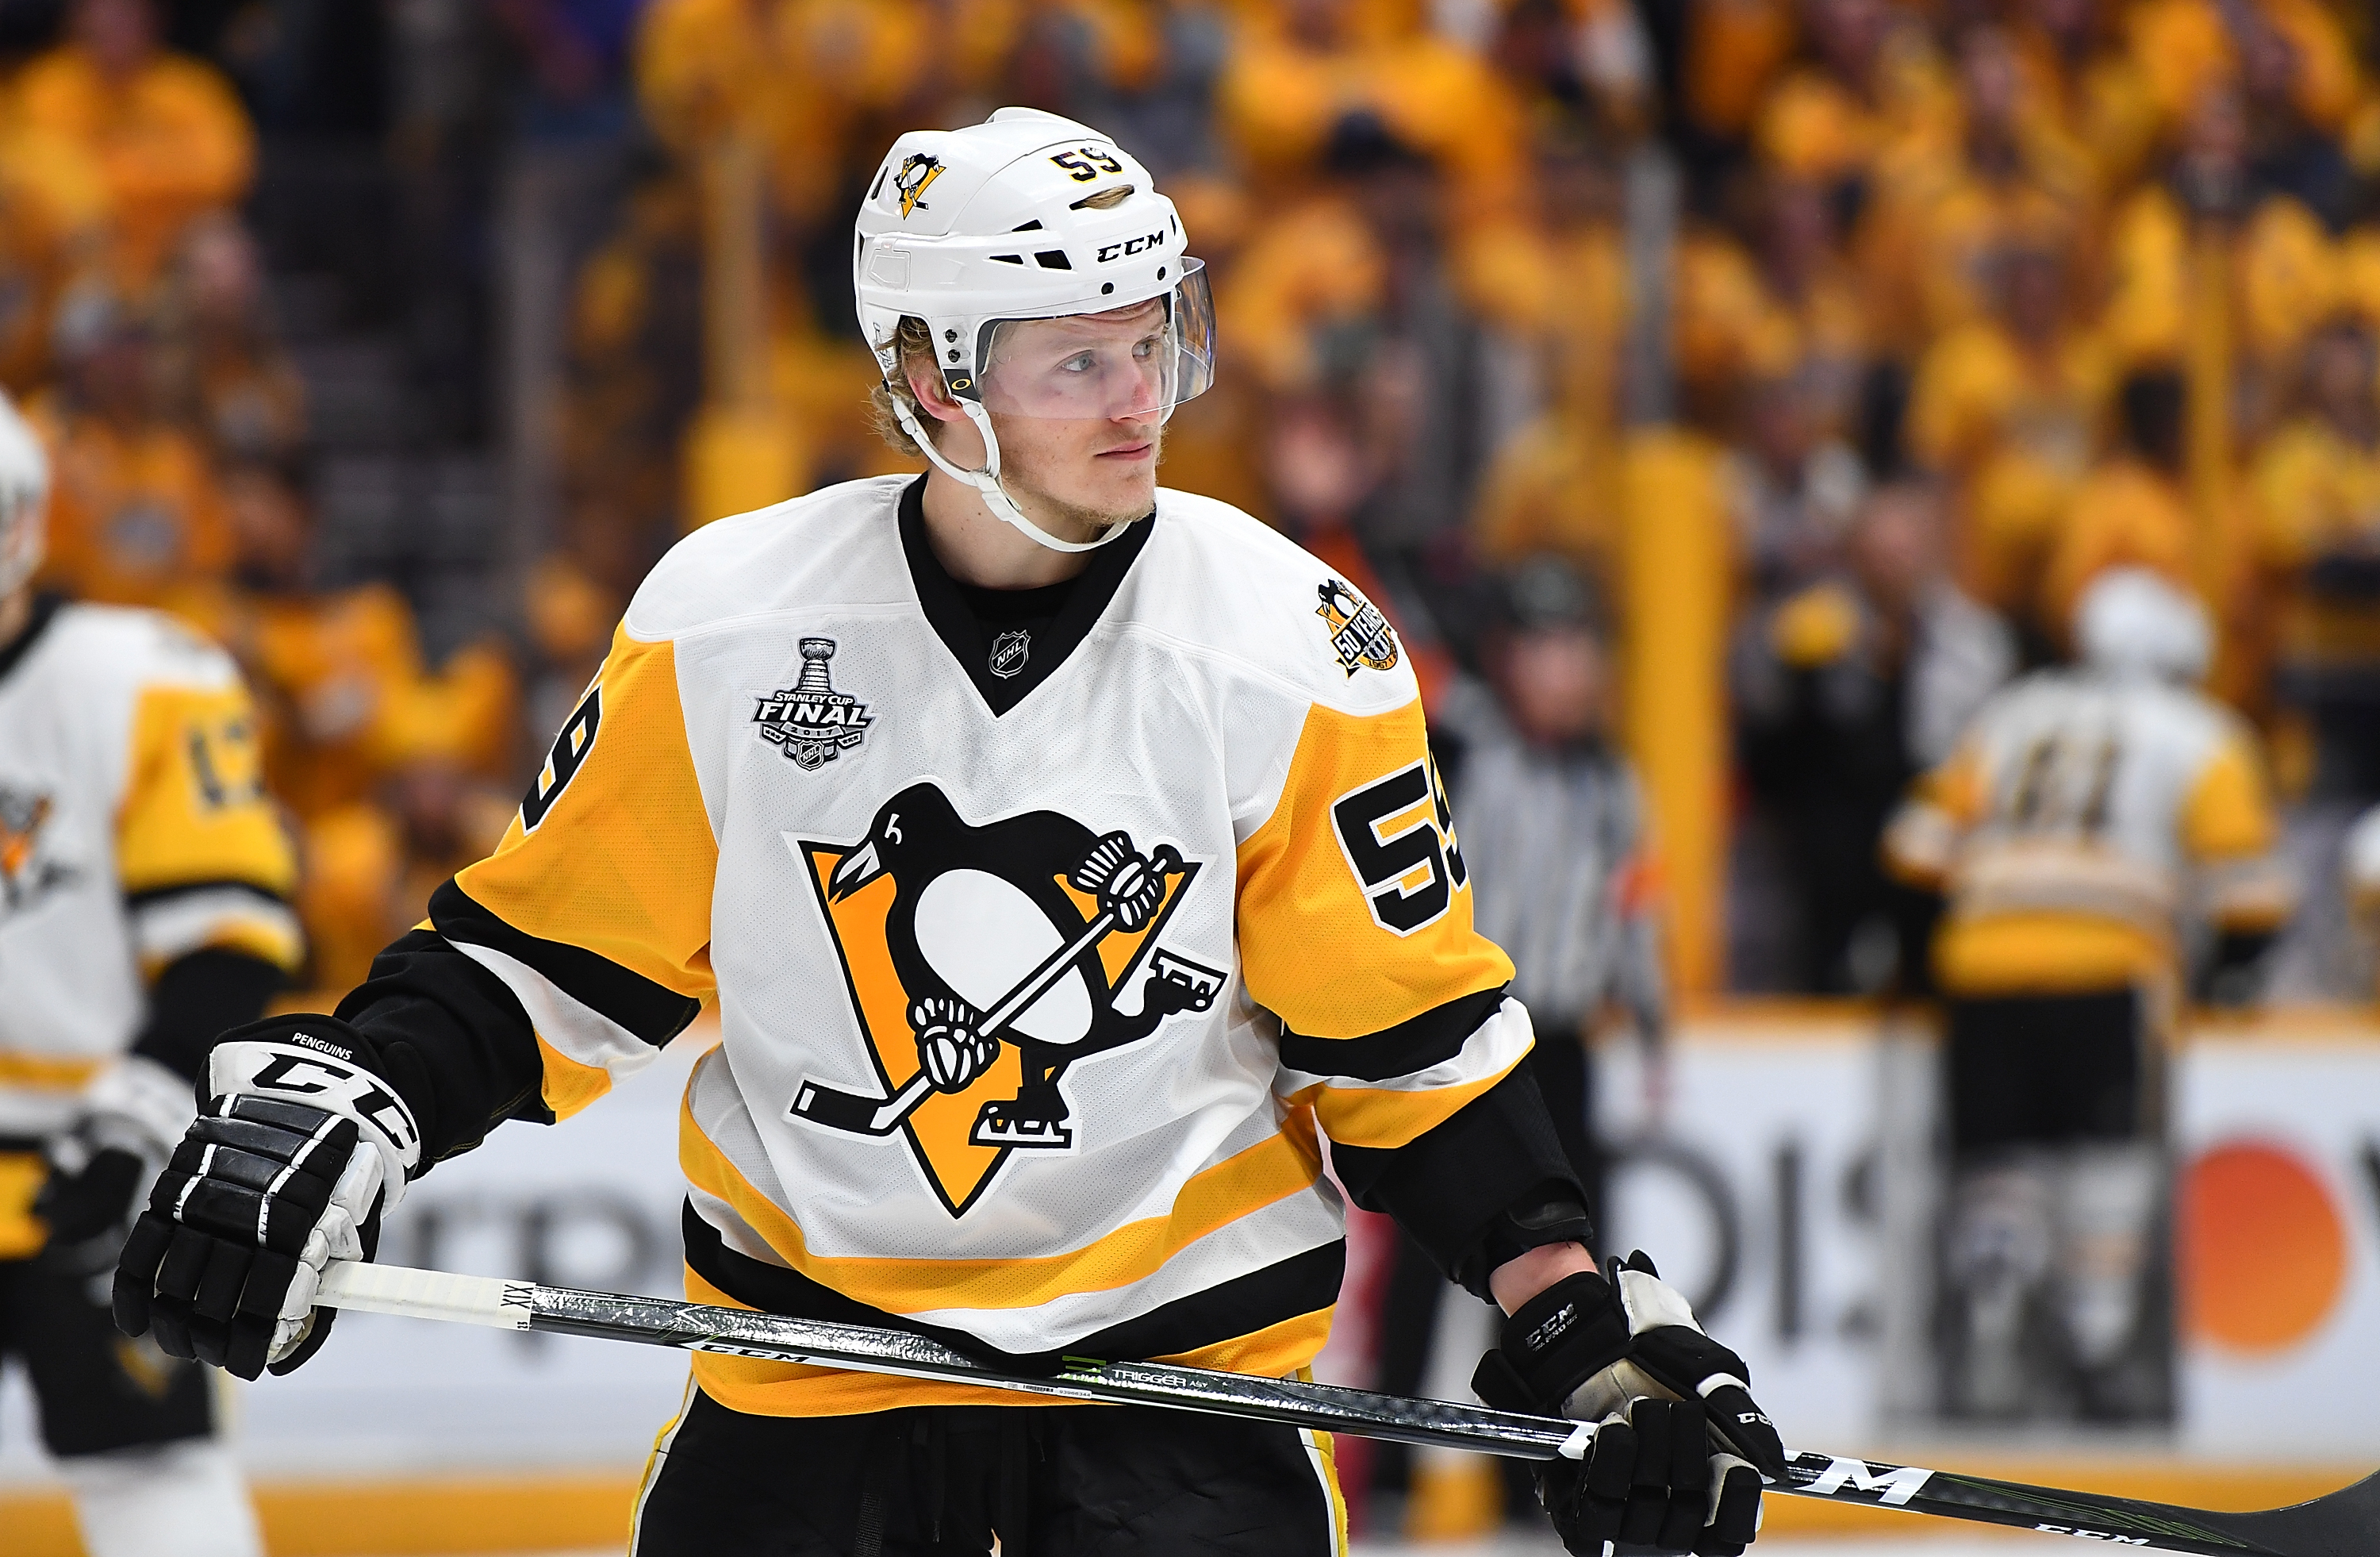 Jake Guentzel is a Player to Watch for Pittsburgh Penguins This Season